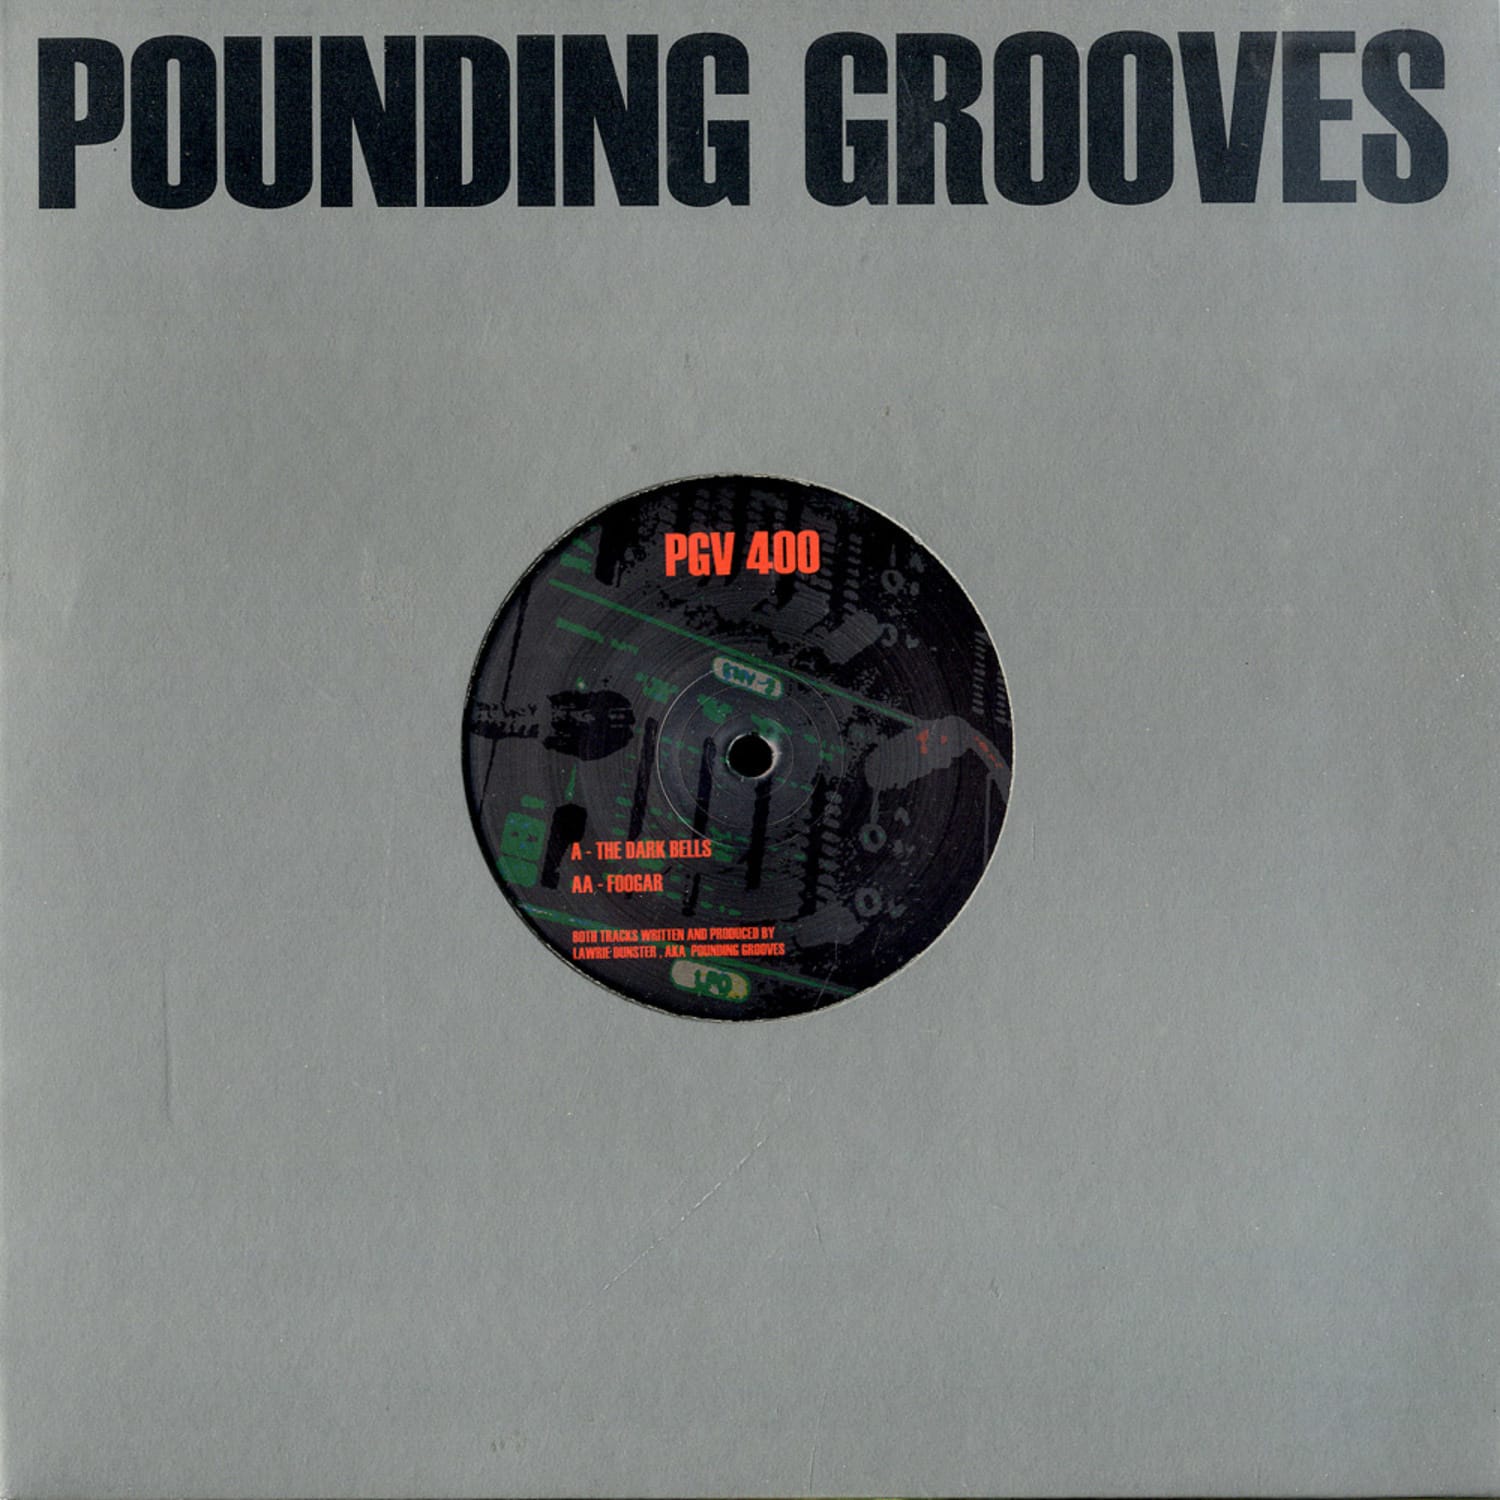 Pounding Grooves - PGV 400 